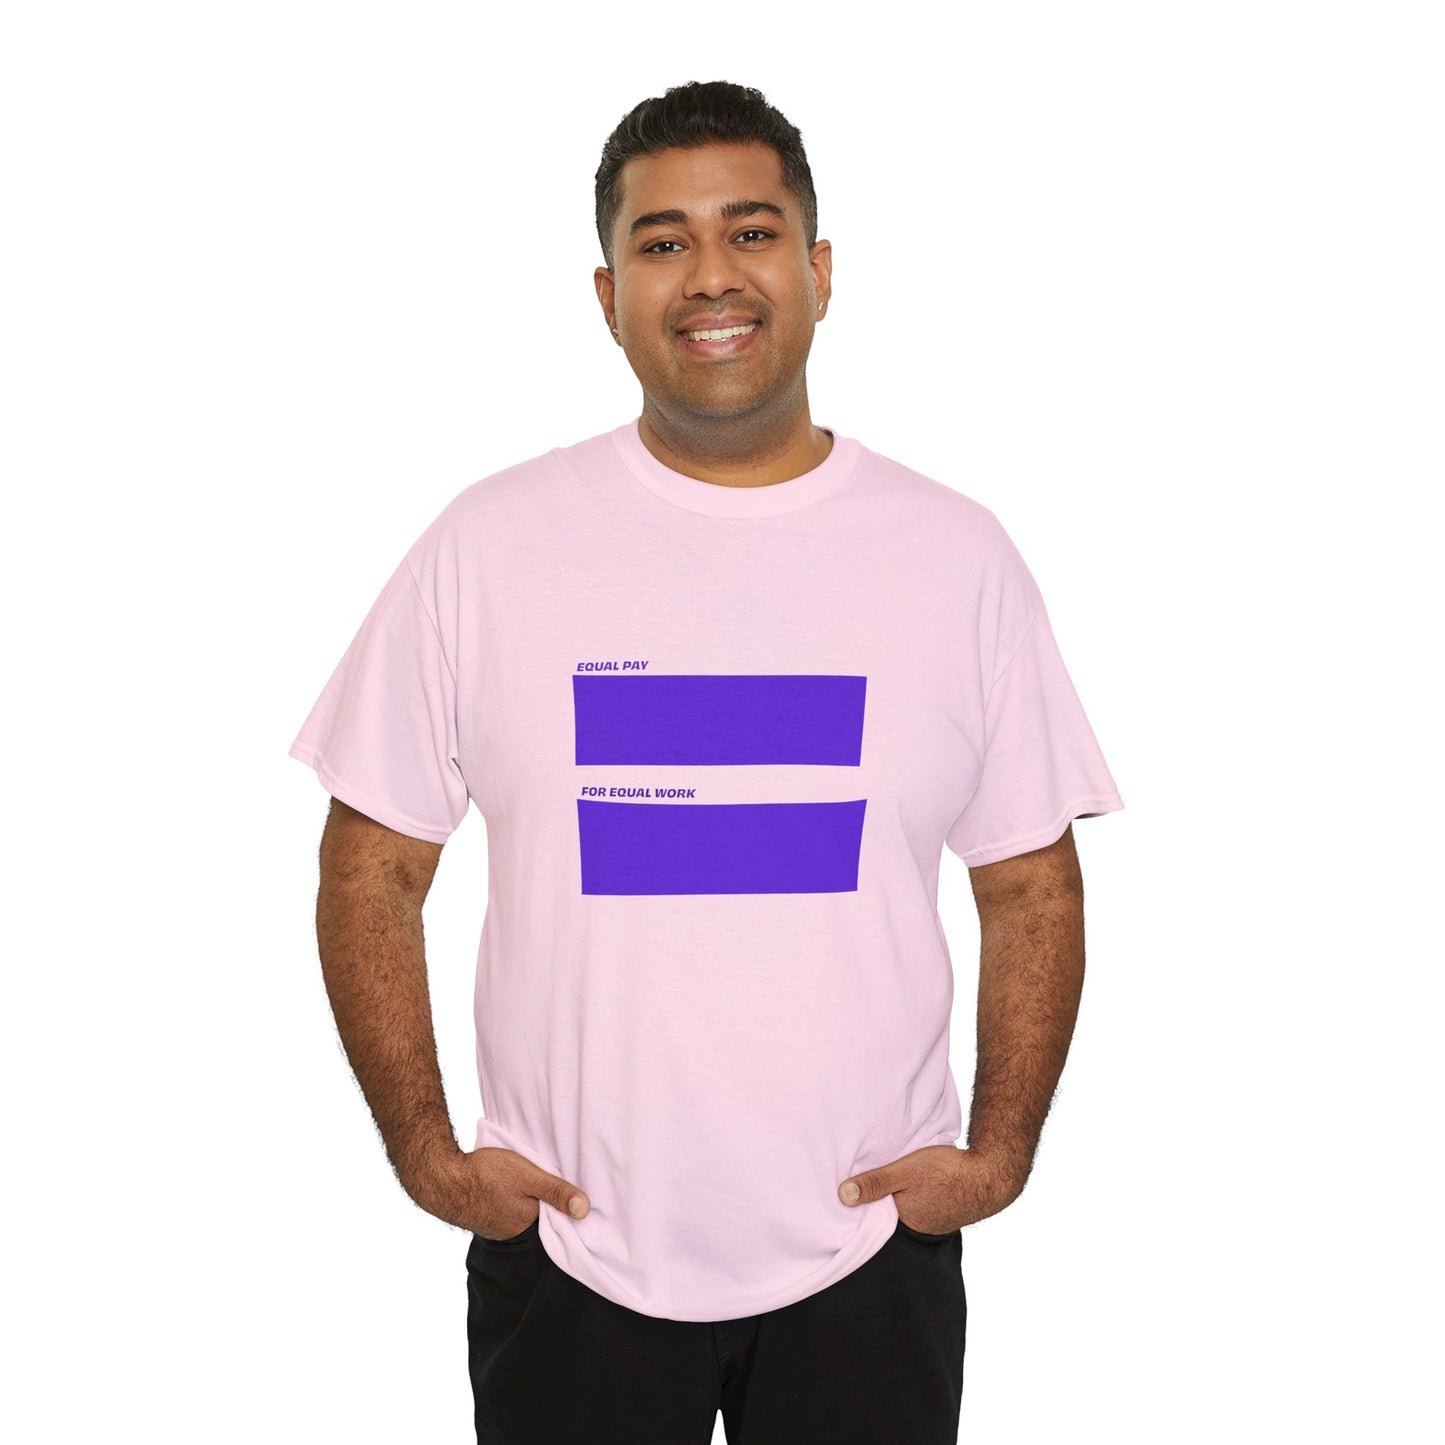 Equal Pay For Equal Work T-Shirt